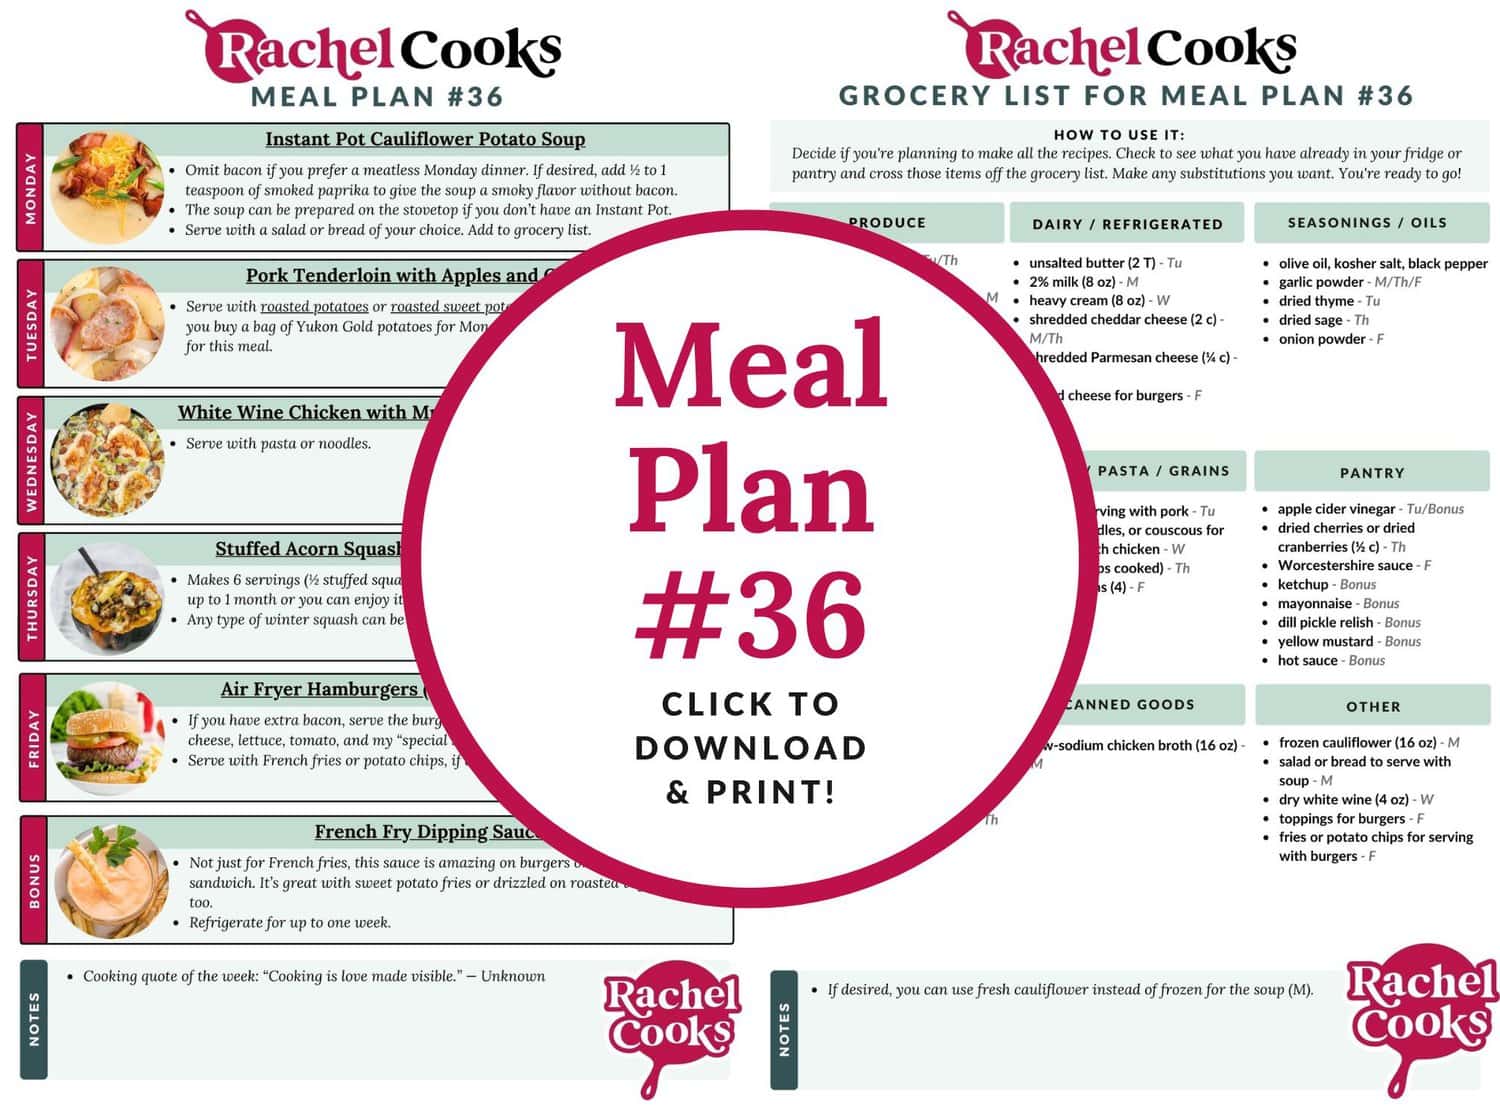 Meal Plan 36 preview image with text overlay.